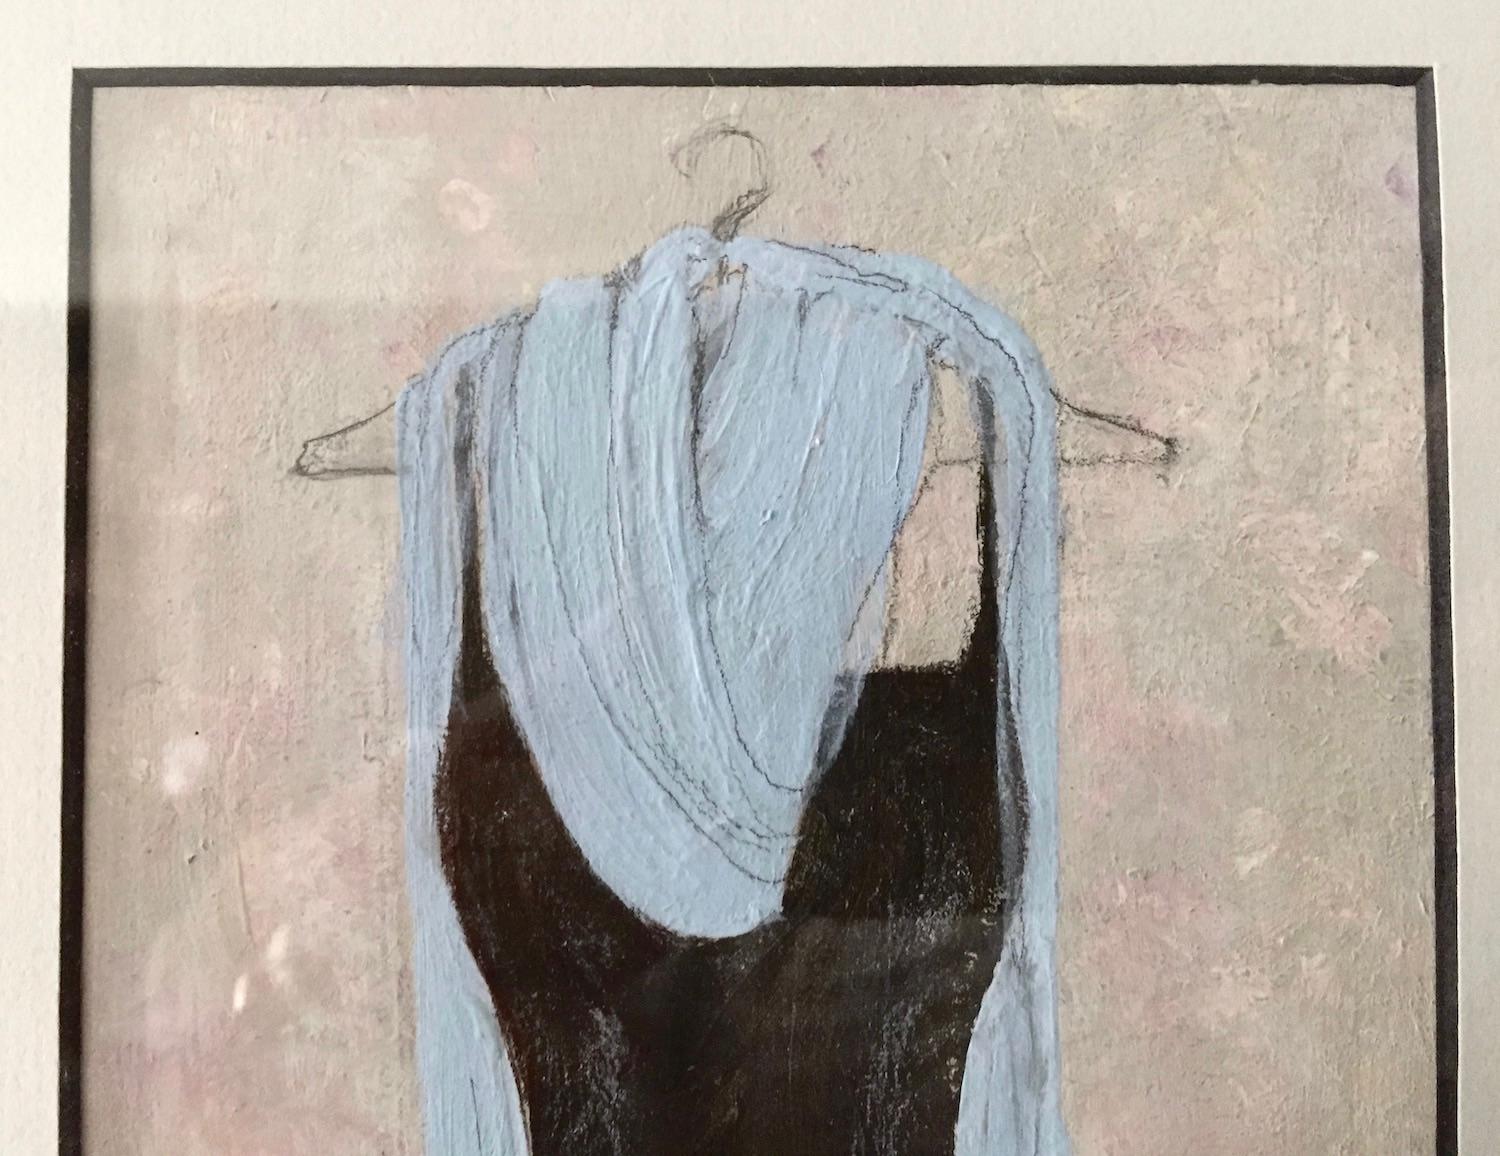 This dress painting on board communicates a sense of timelessness. A scripted pencil pattern adds to the composition building up the neutral tone on tone layering in the background. The combination of delicate detail and intuitive brush work create